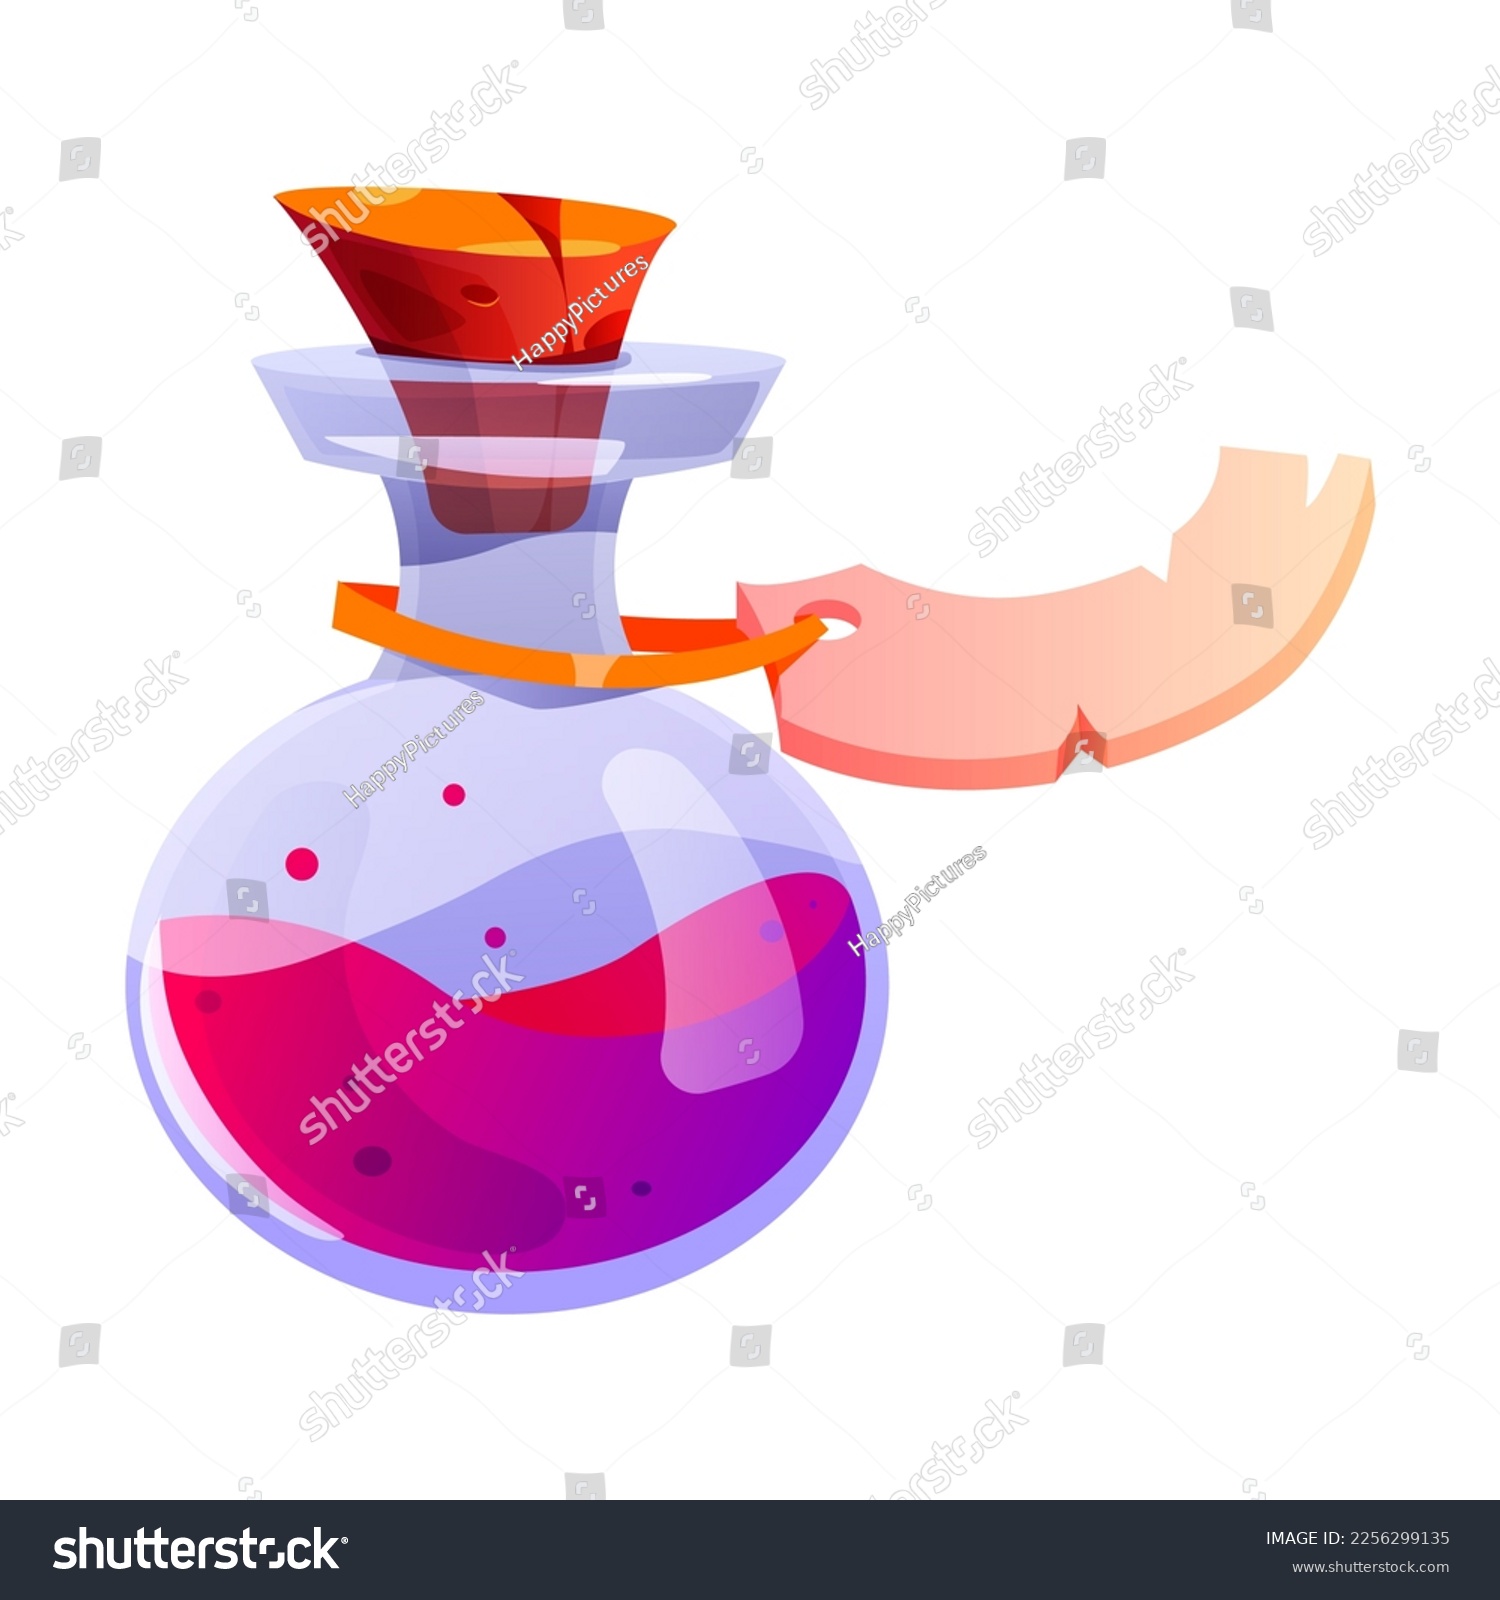 SVG of Potion Jar with Tag and Cork as Game Object Vector Illustration svg